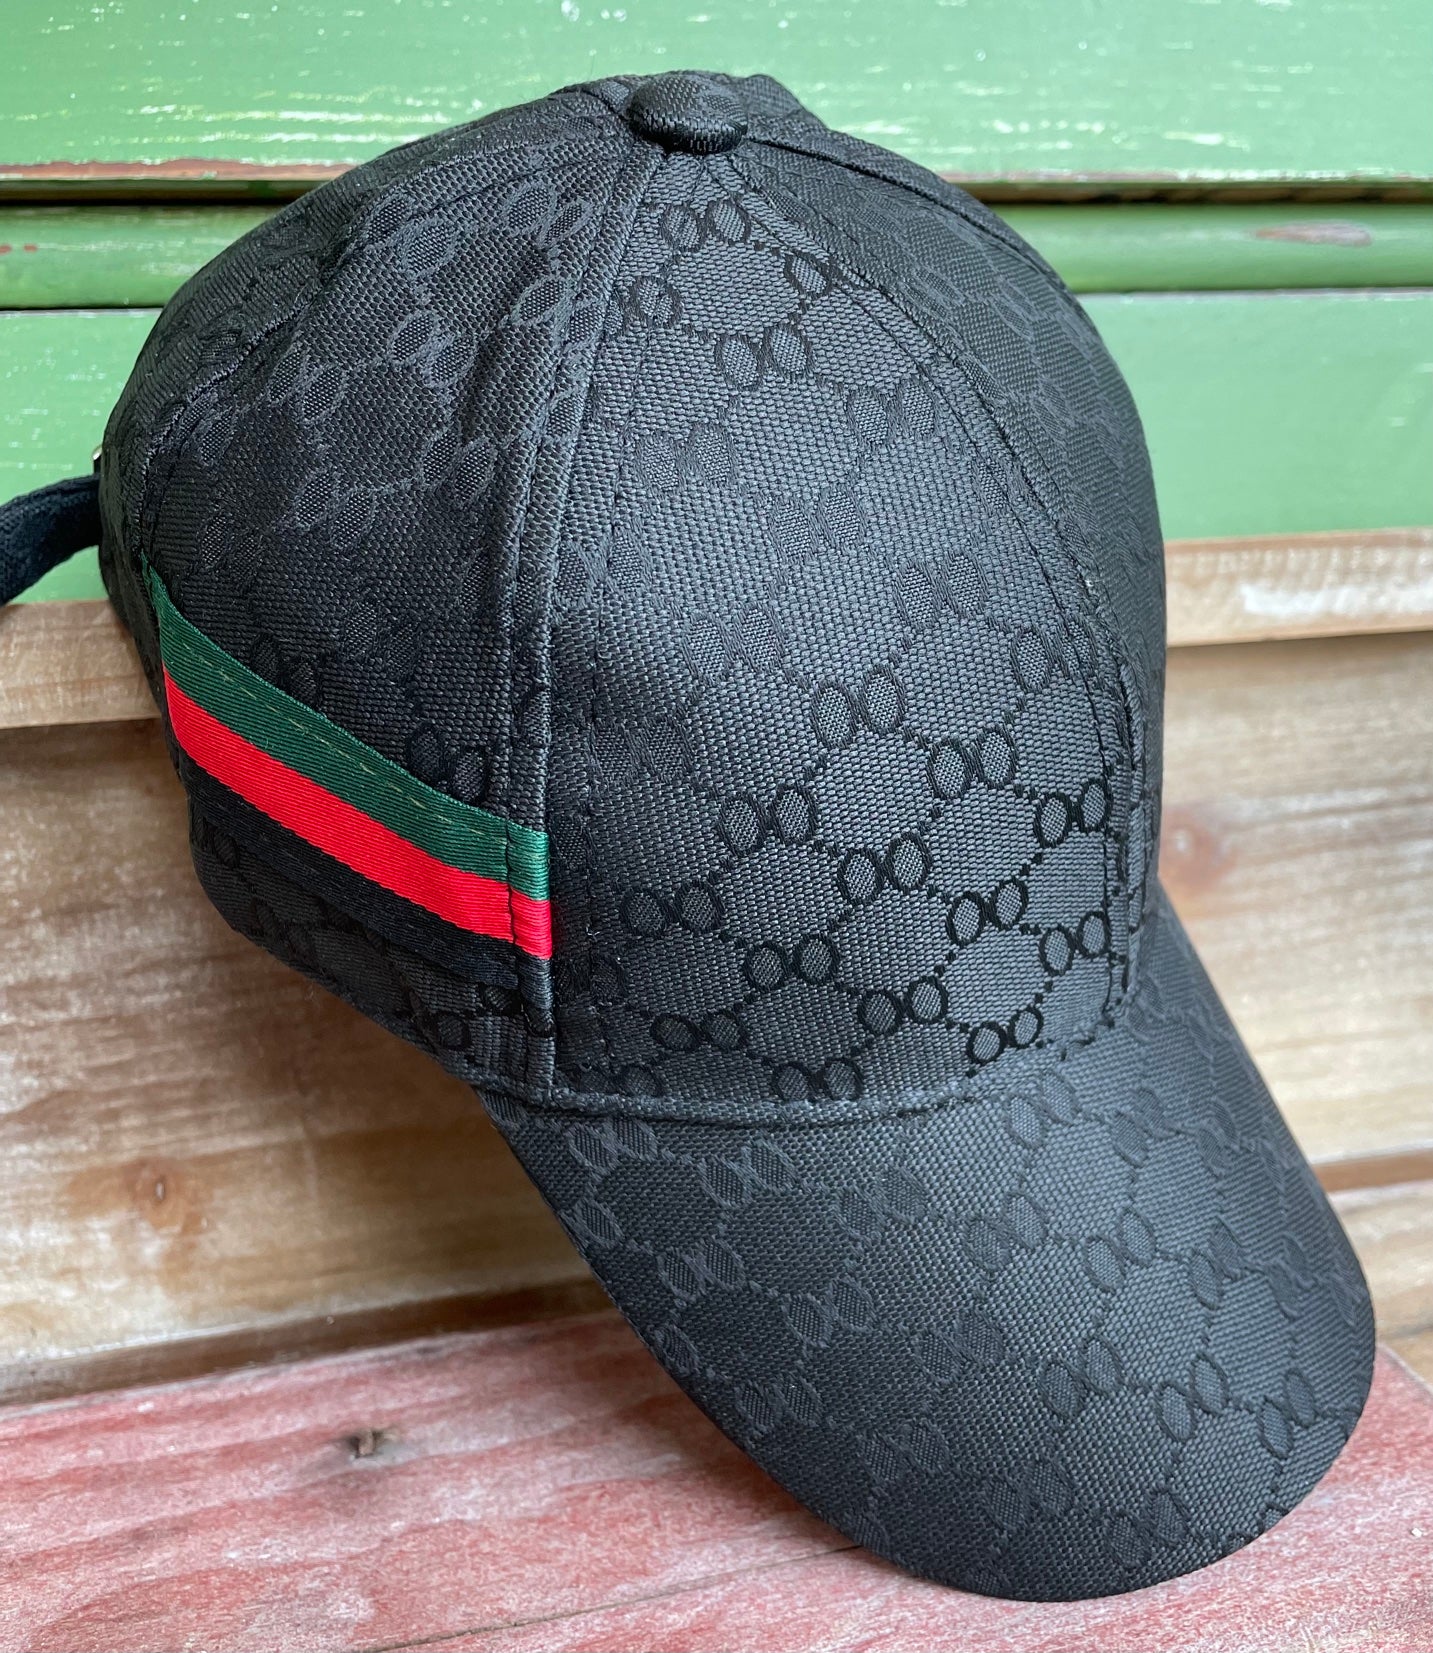 honeycomb print black hat with green, red and black stripe on side